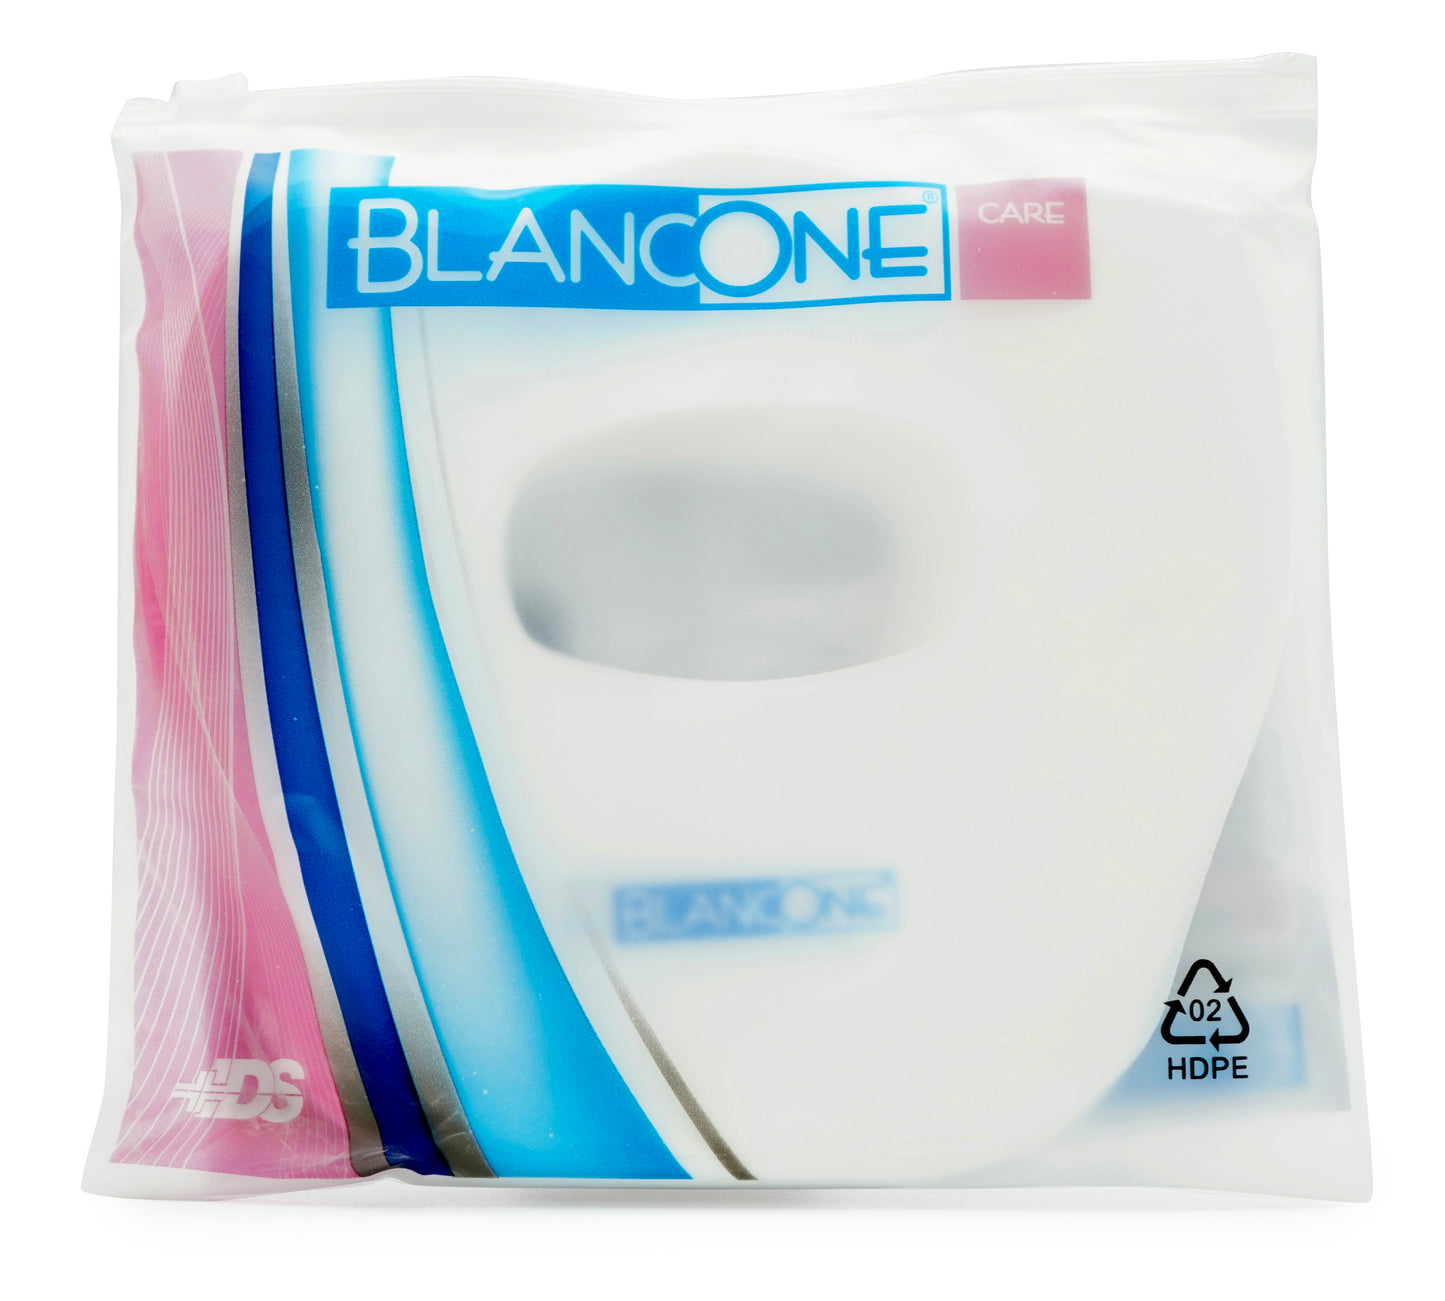 BlancOne Face Protection